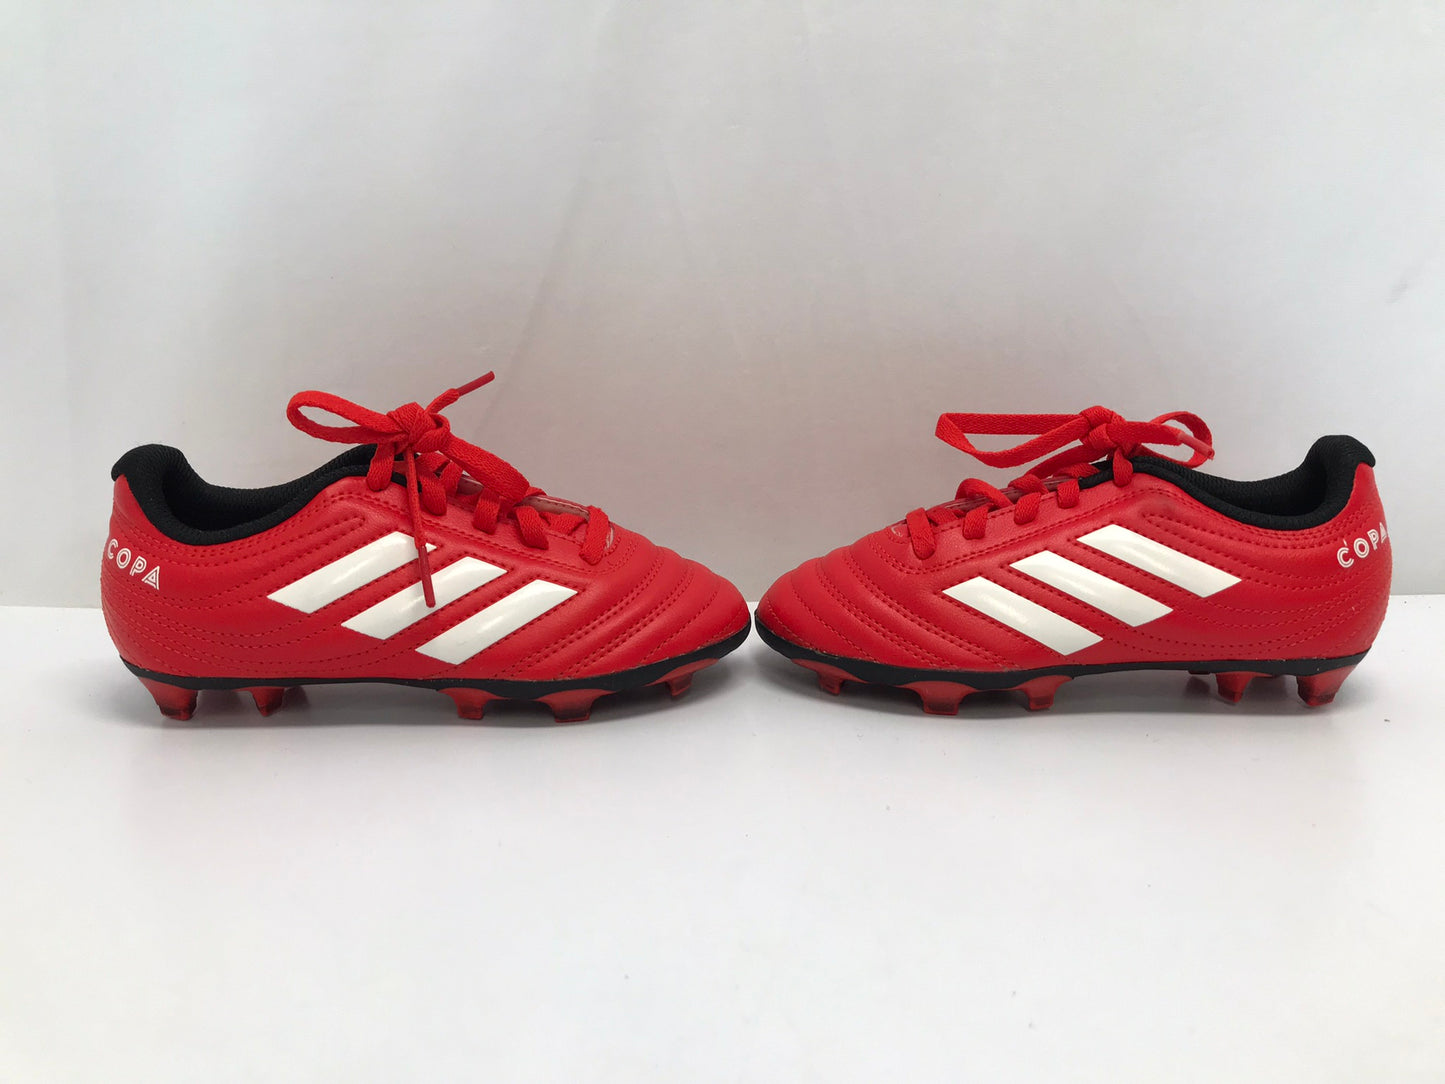 Soccer Shoes Cleats Child Size 12 Adidas Red Black White Excellent